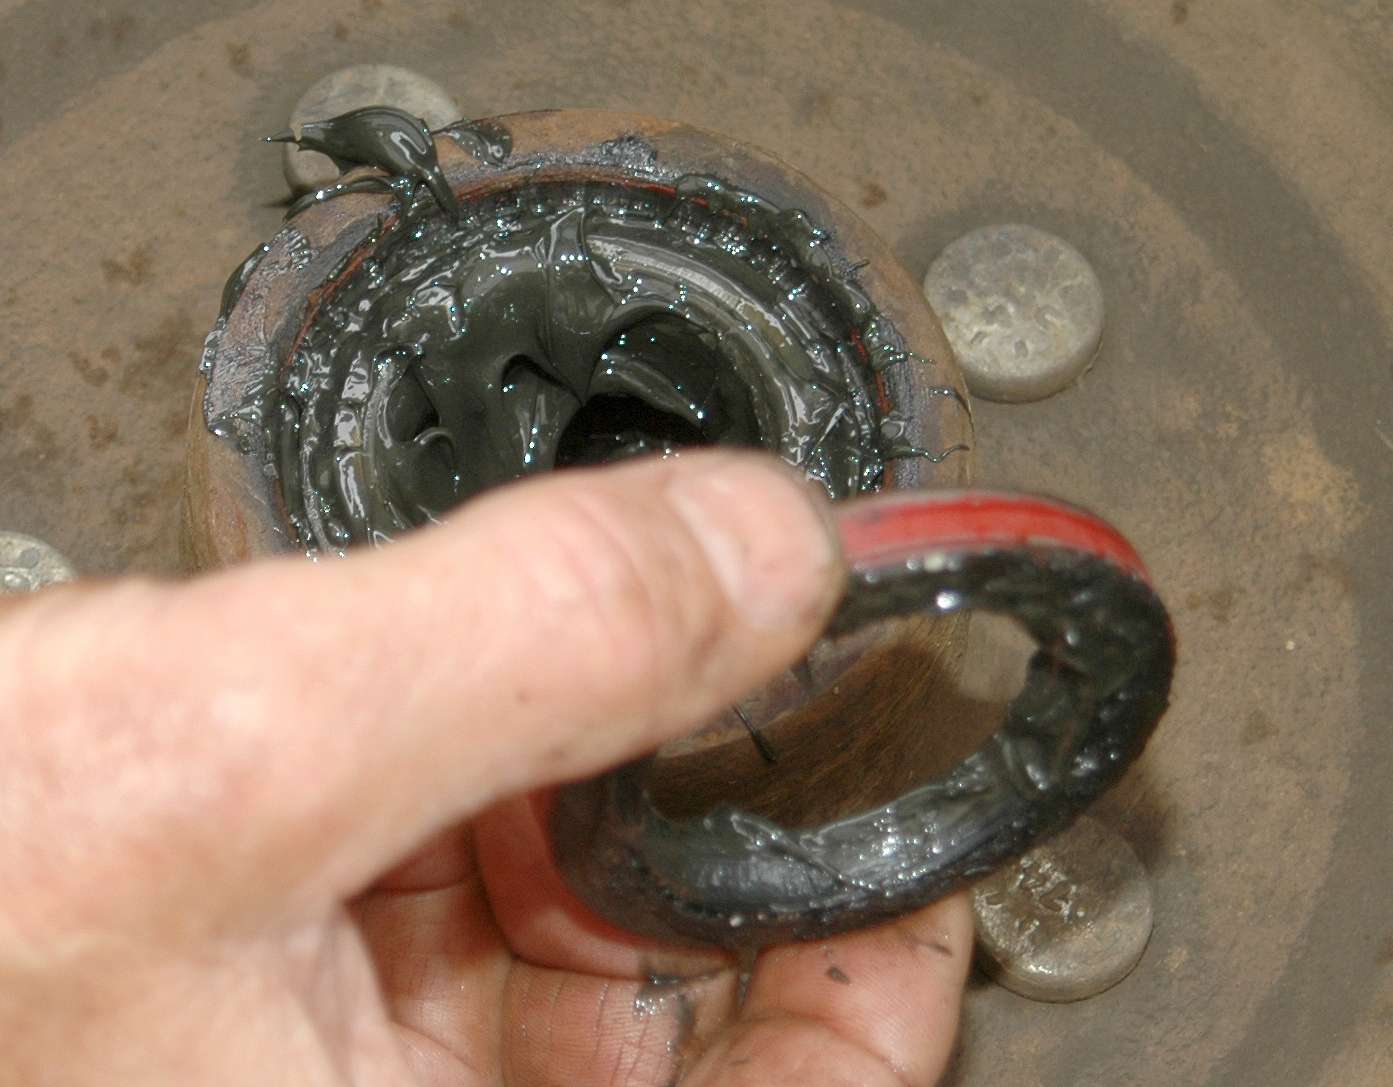 Pull the hub off the axle and turn it over. The inside wheel bearing lies under a seal. I punched the seal out by tapping on a screwdriver from the opposite side. Take care not to tap on the race that the bearing rides on or to damage the seal. A damaged seal must be replaced.